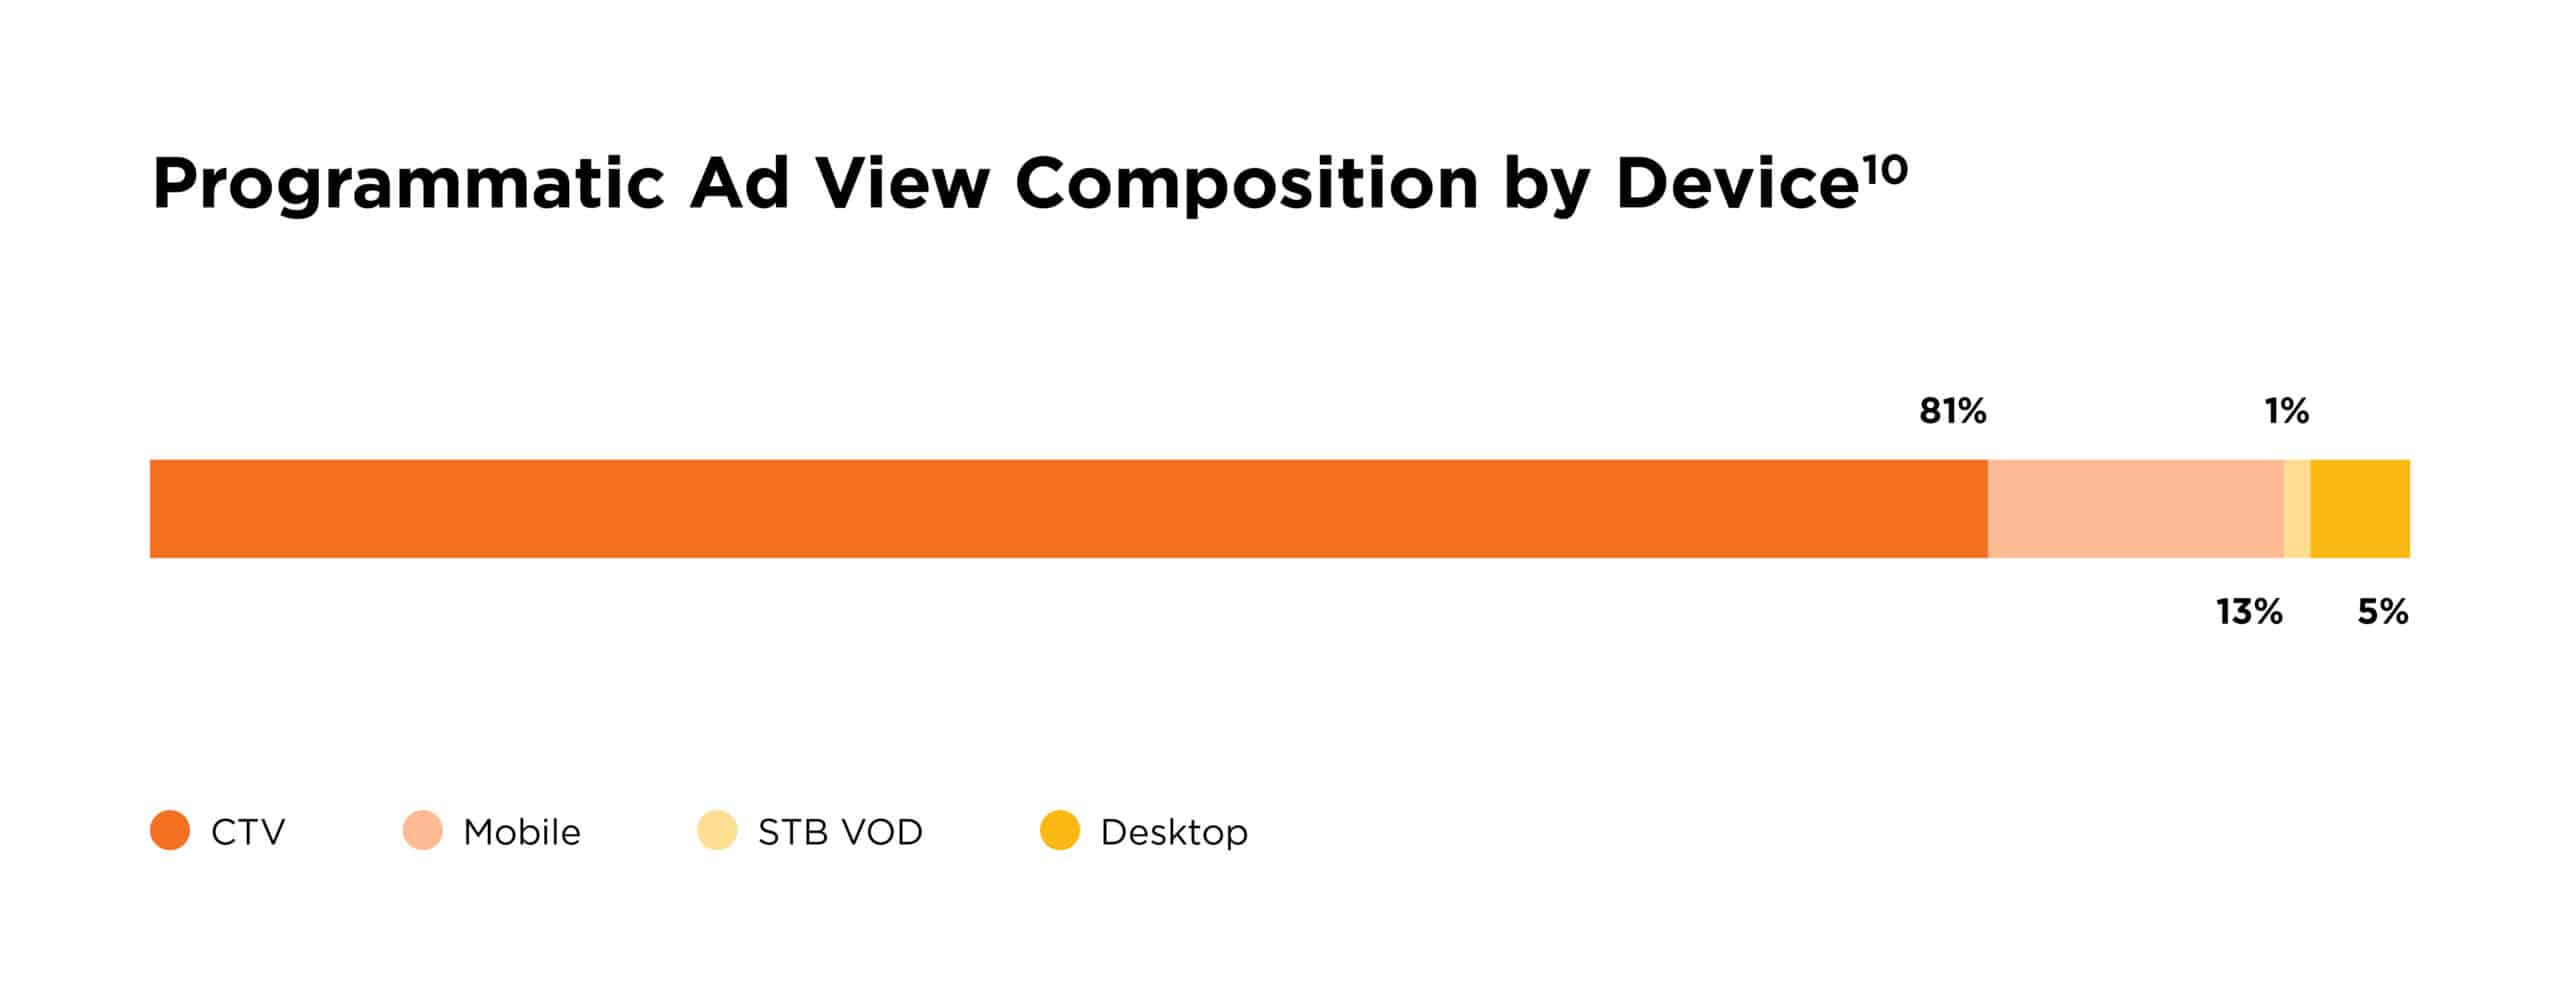 Bar chart shows programmatic ad view composition by device, with CTV at 81%.